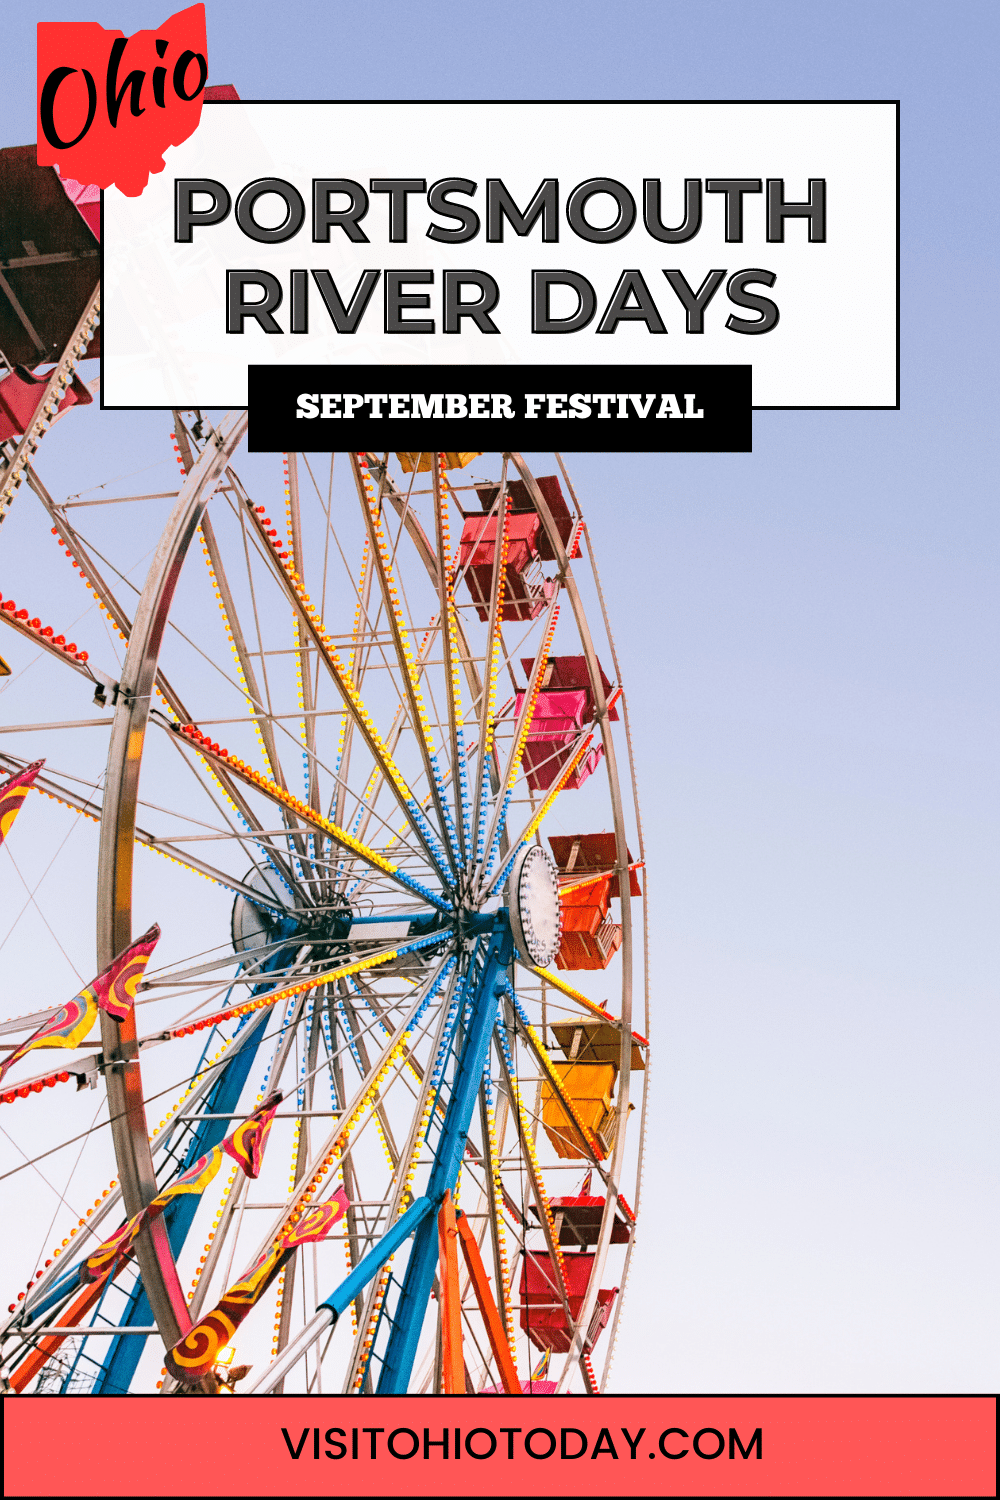 Experience Portsmouth River Days during the Labor Day weekend, from September 1st to 3rd, 2023. Enjoy three days of family entertainment and live music along the riverfront of Portsmouth and surrounding areas.